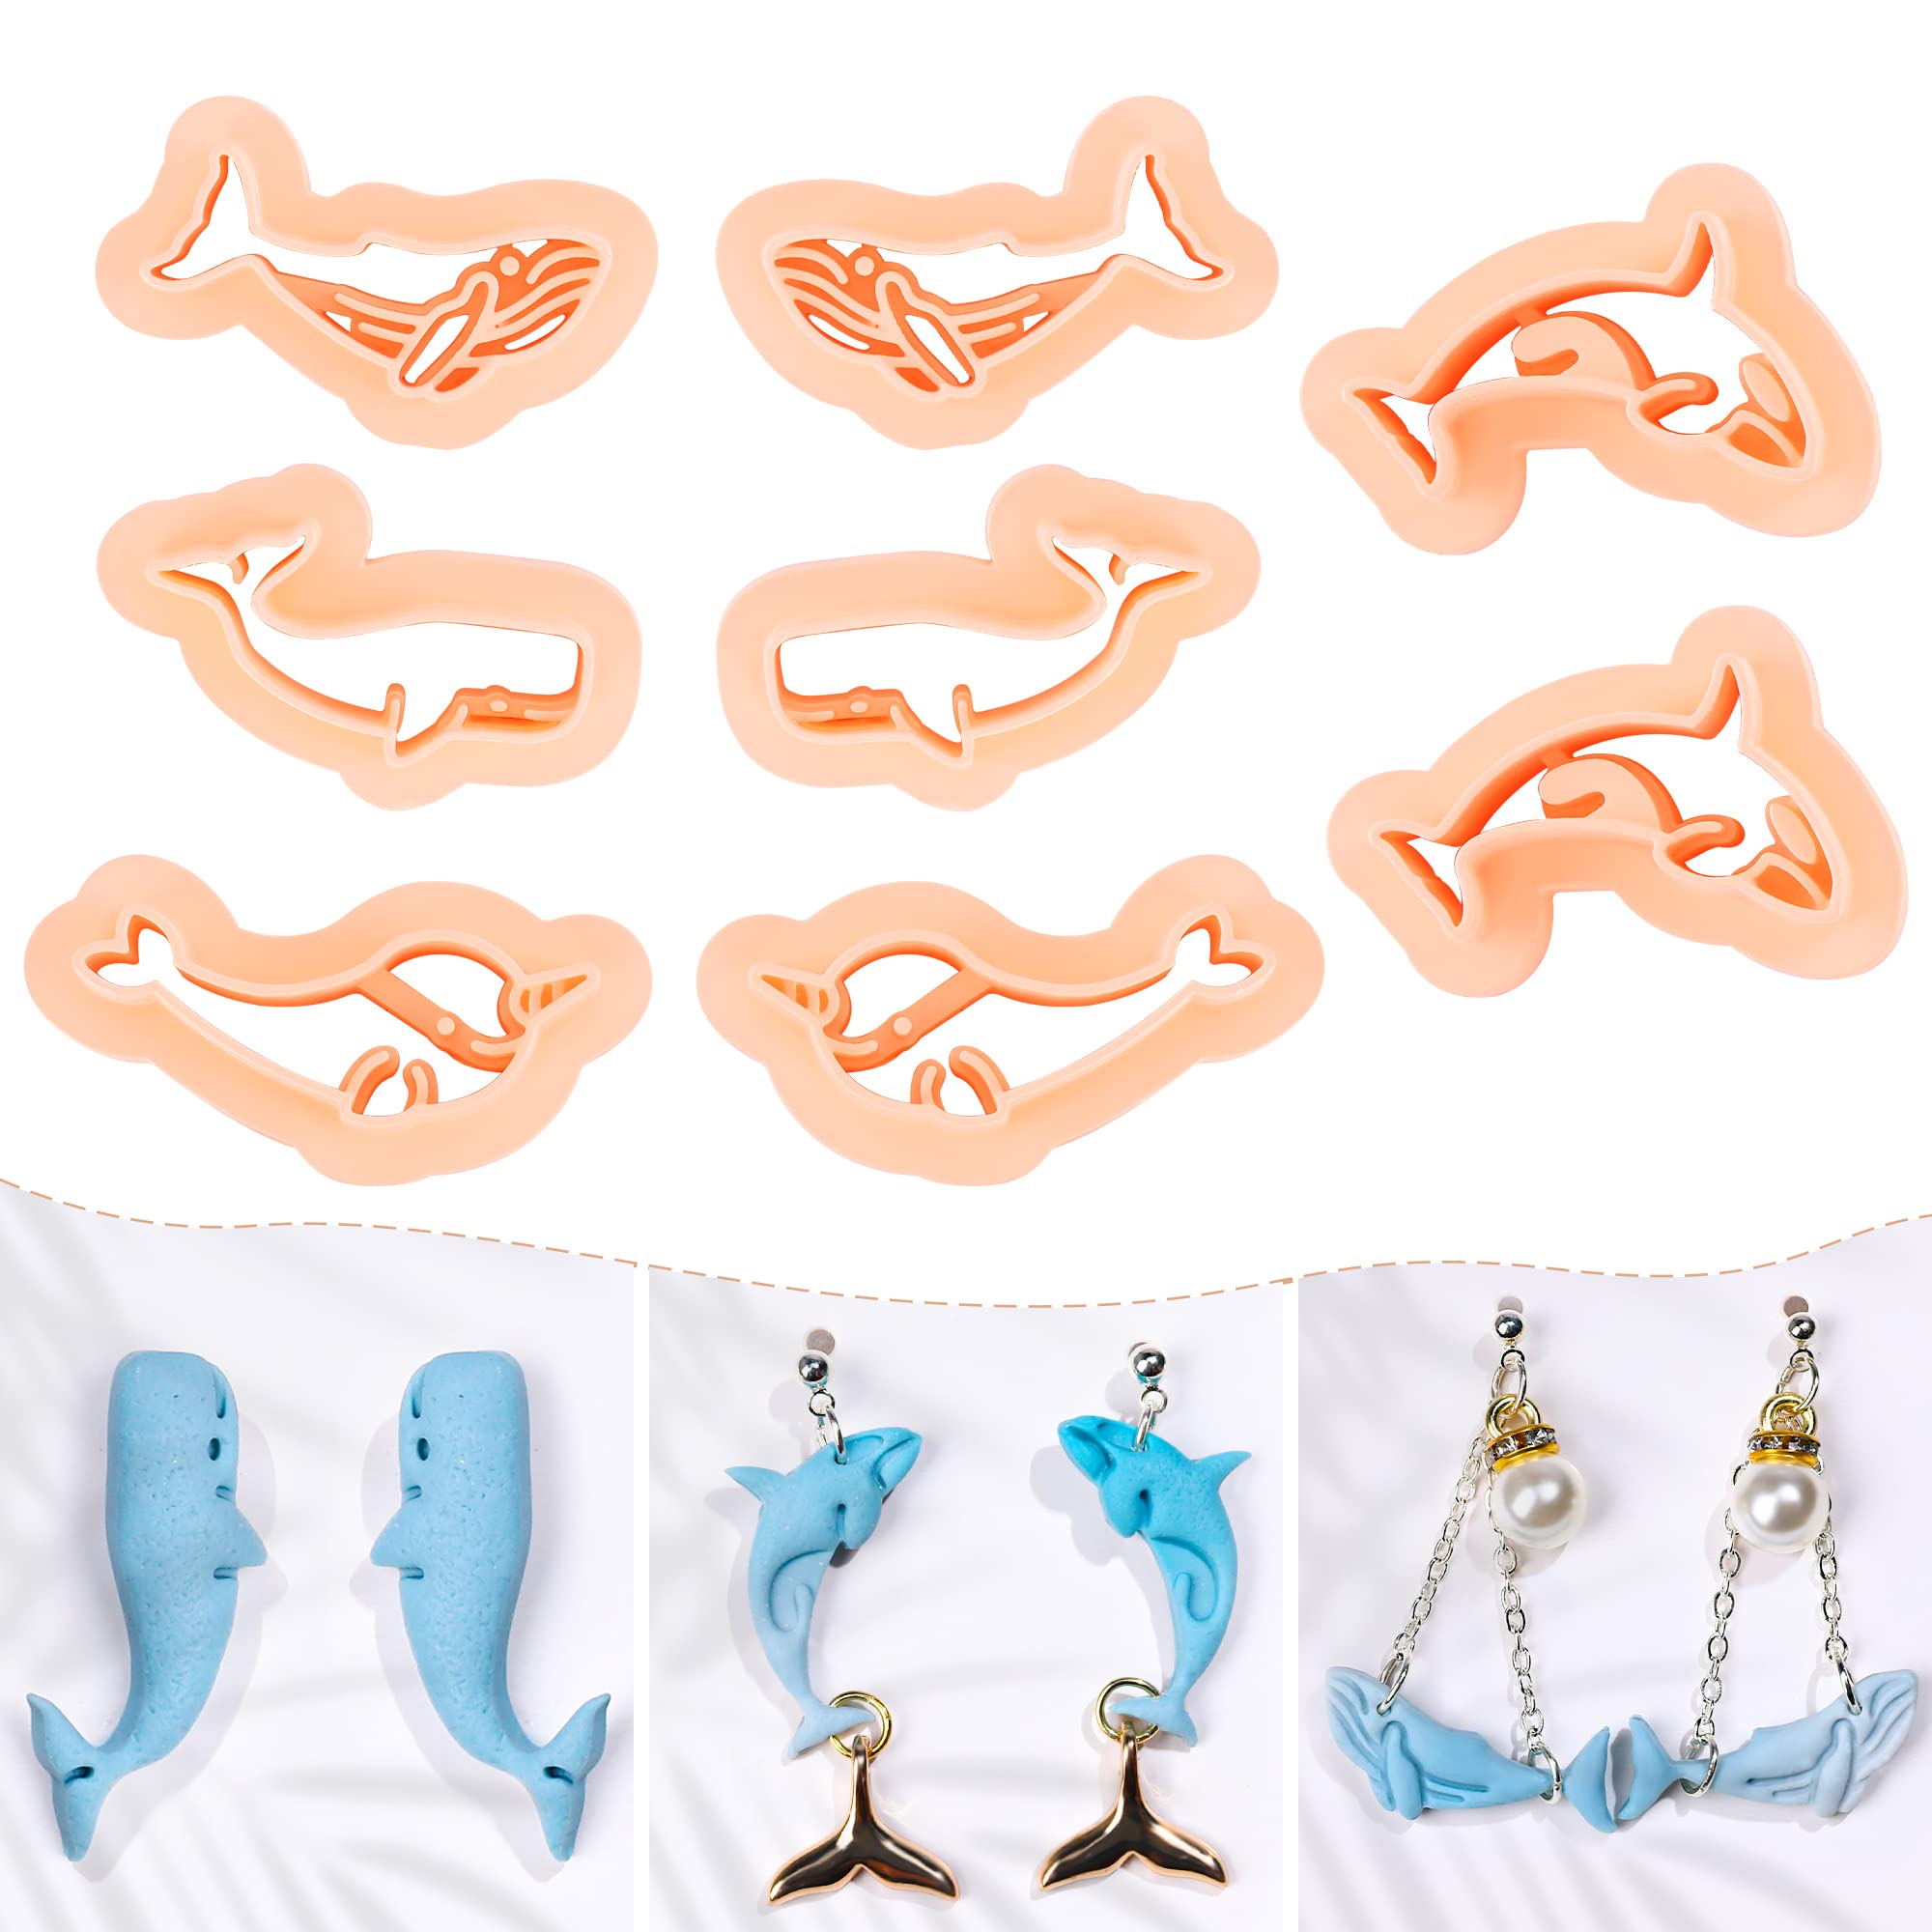 Puocaon Whale Clay Earring Cutters 8 Pcs